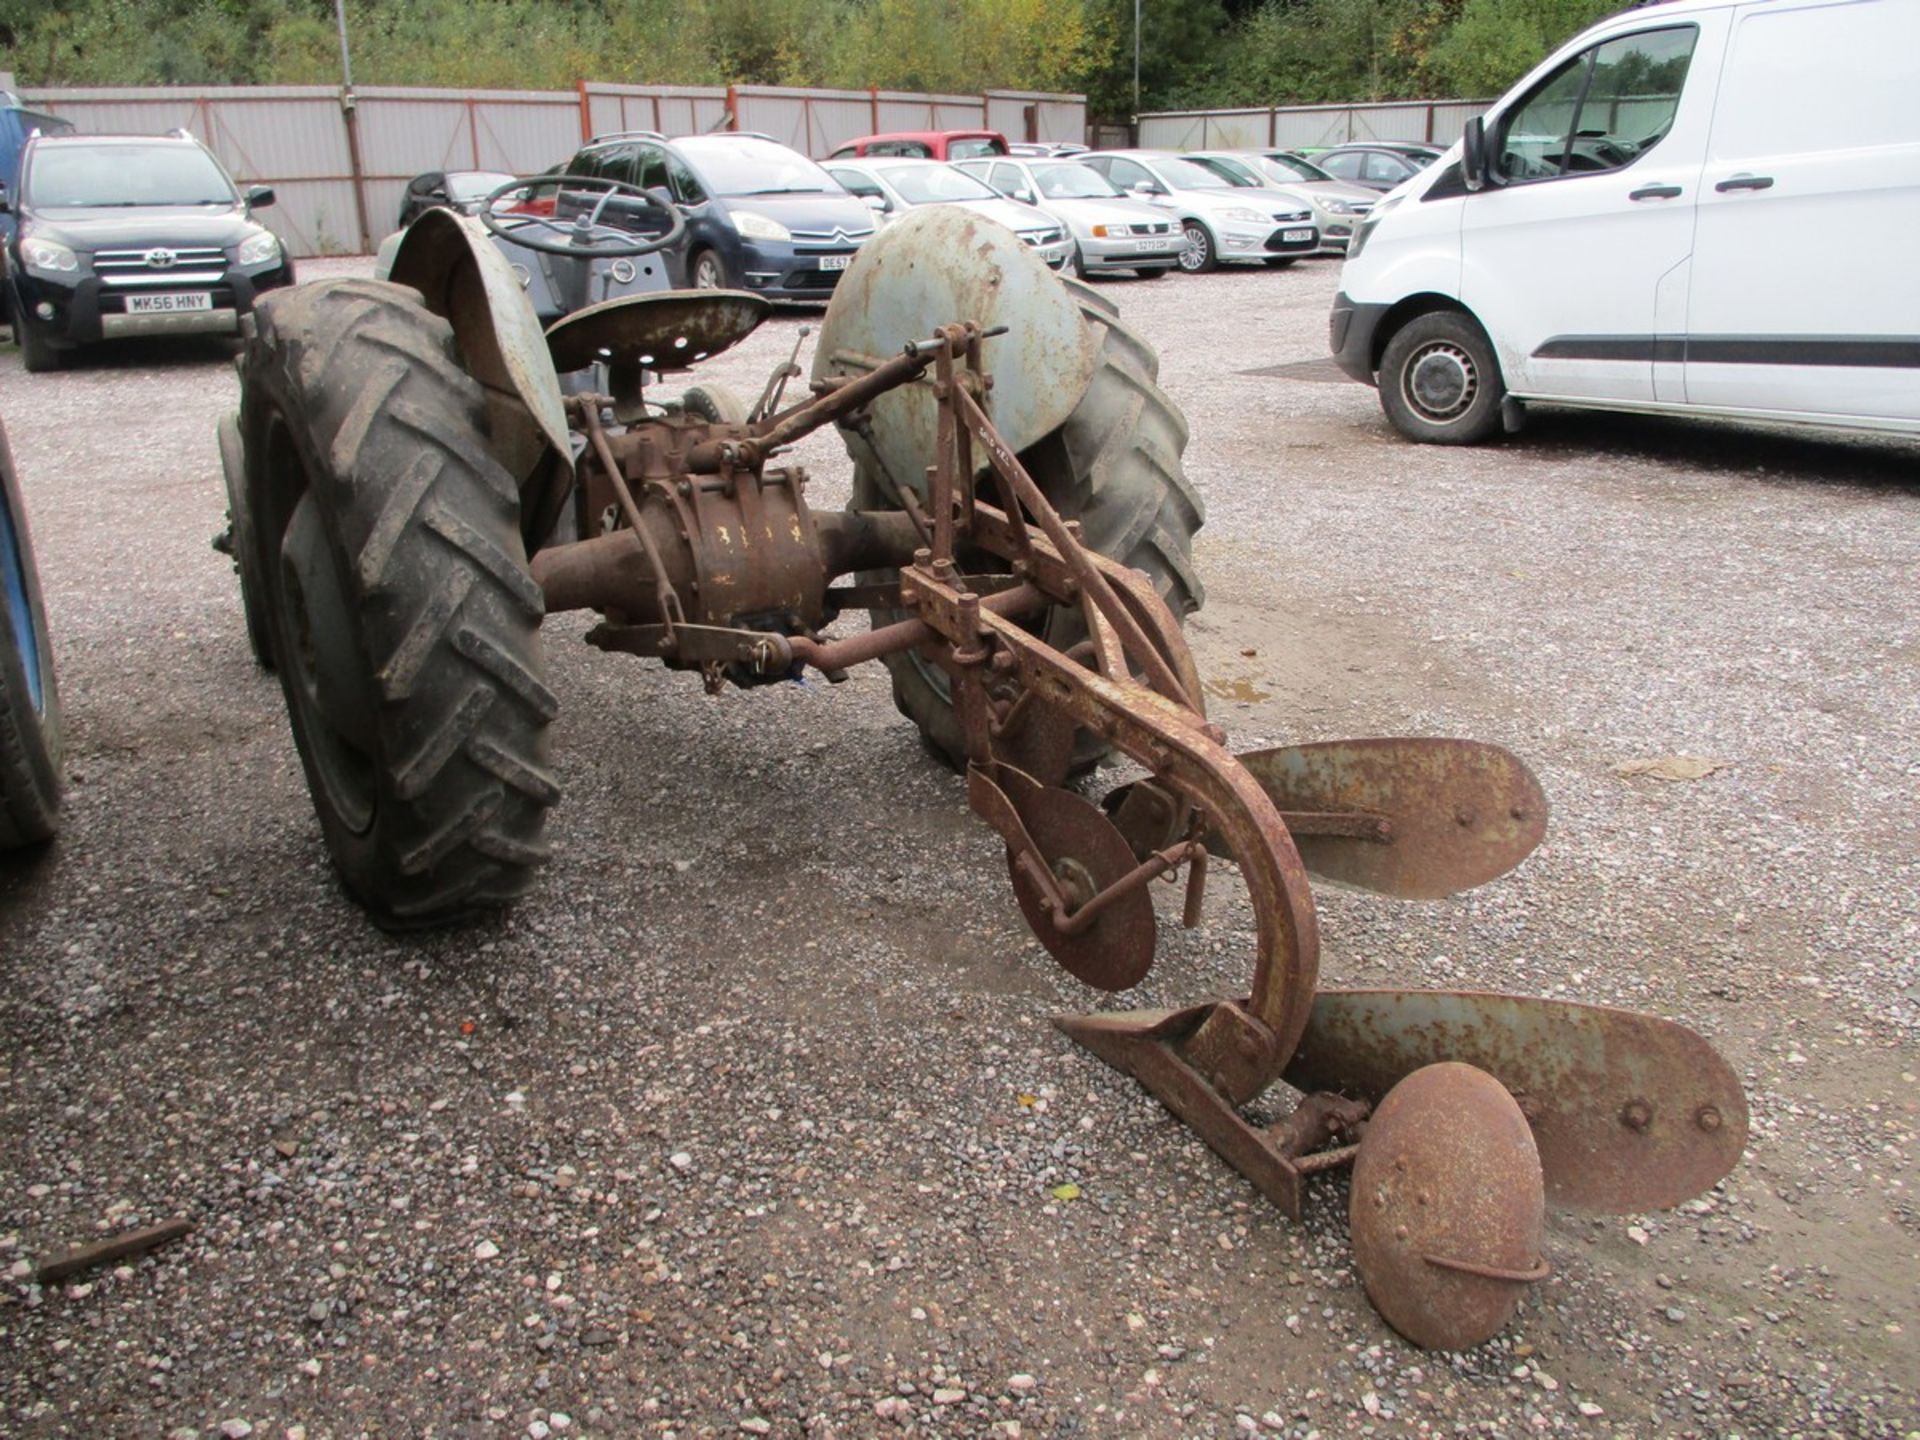 FERGIE T20 TRACTOR C/W 2 FURROW PLOUGH - Image 6 of 7